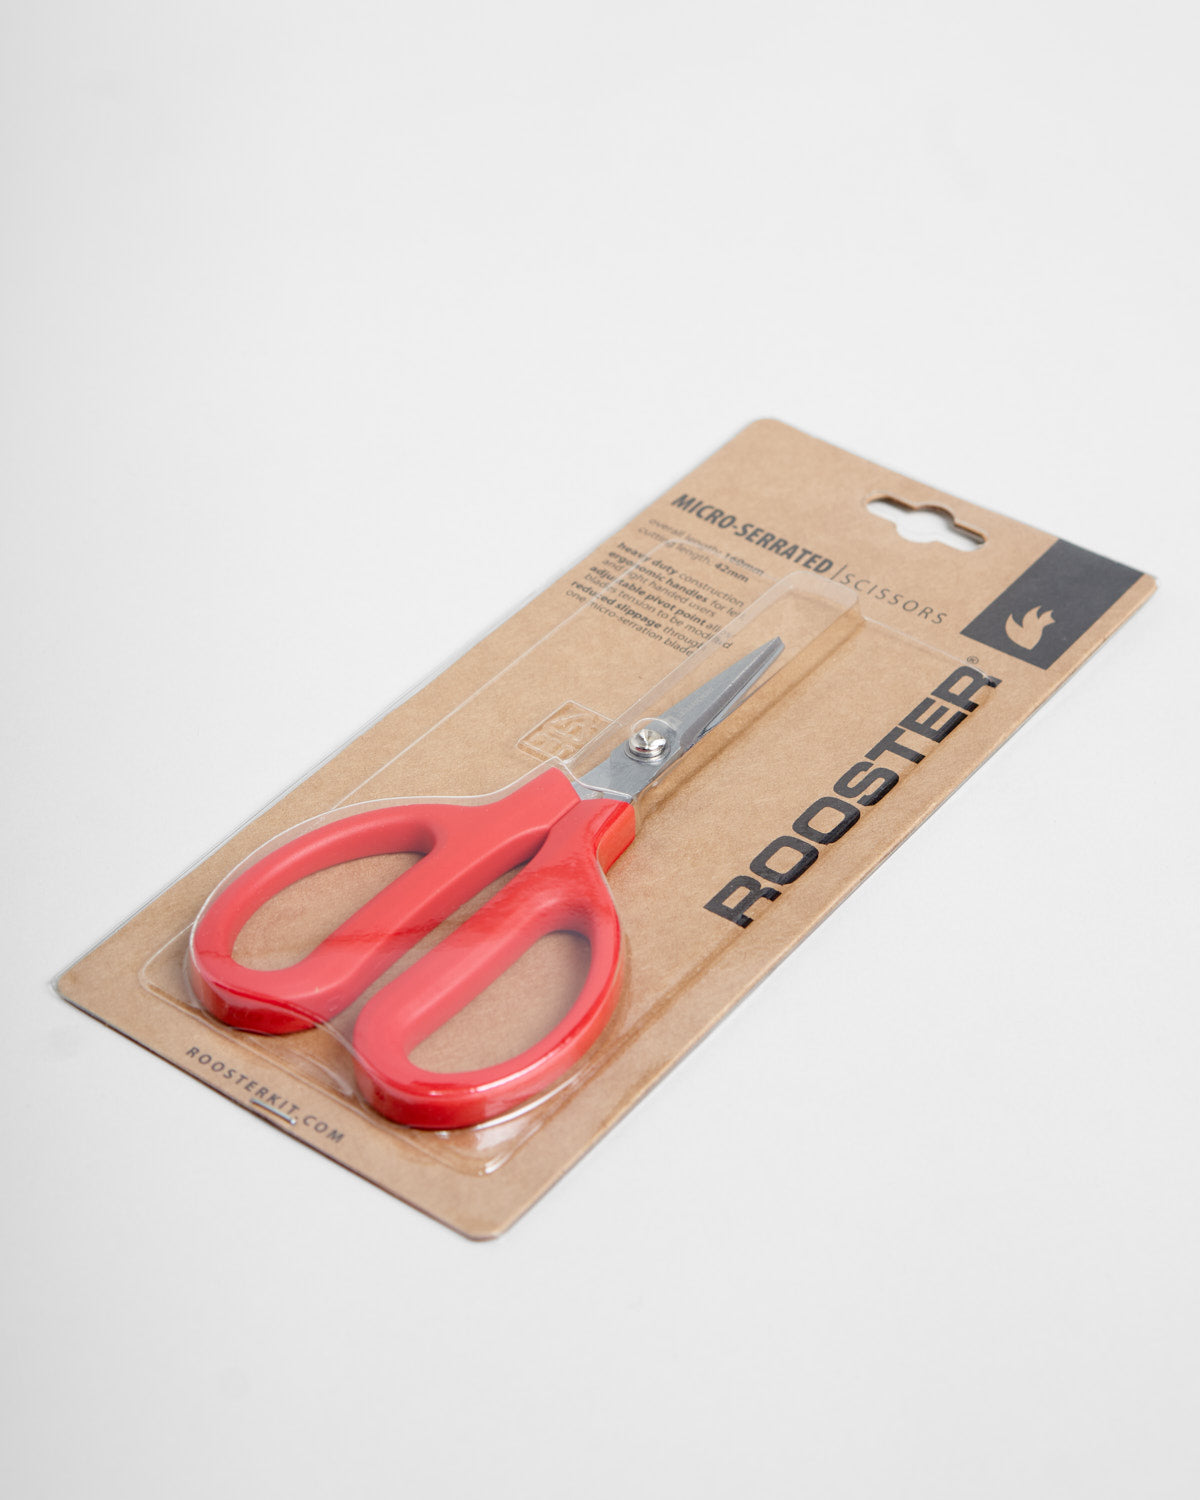 Rooster Micro Serrated Scissors – ROOSTER USA